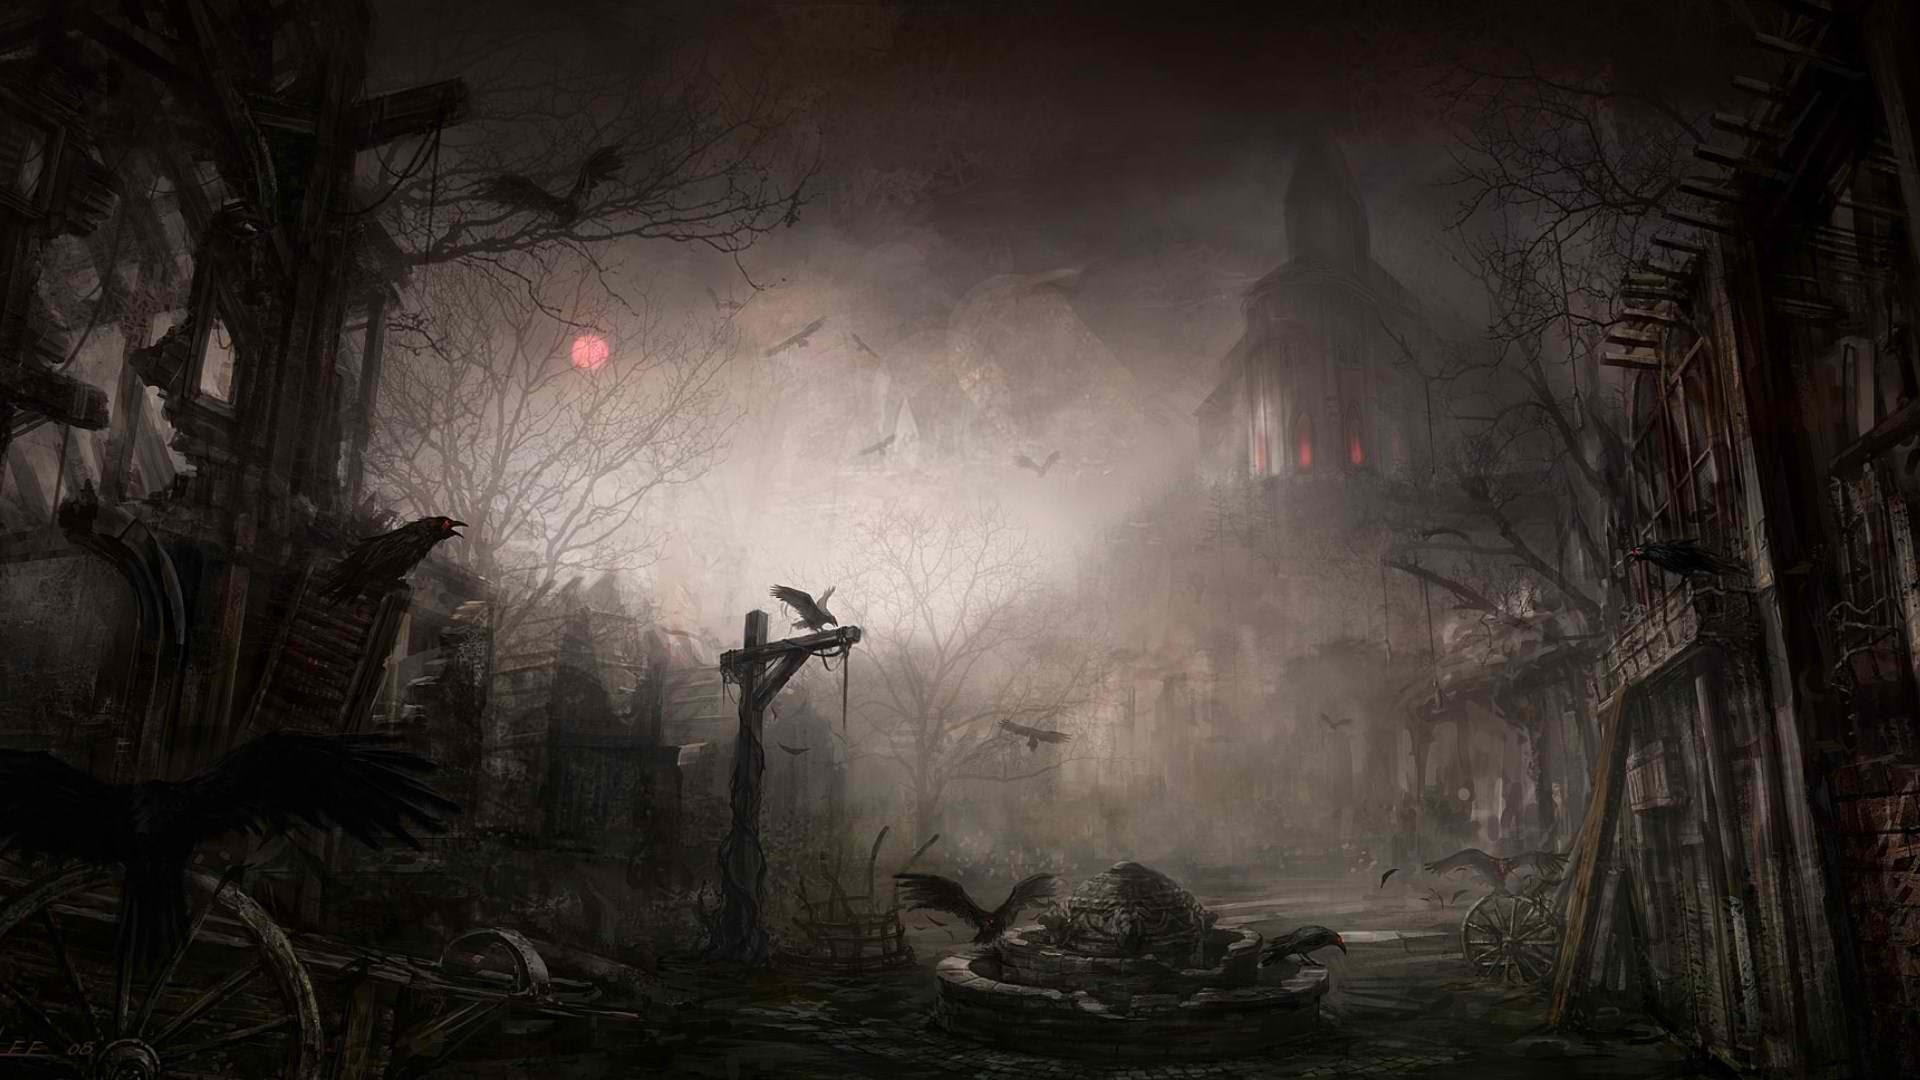 1920x1080 Backgrounds For Cool Halloween Backgrounds | www.8backgrounds.com.  Backgrounds For Cool Halloween Backgrounds 8backgrounds Com. Wallpaper's ...